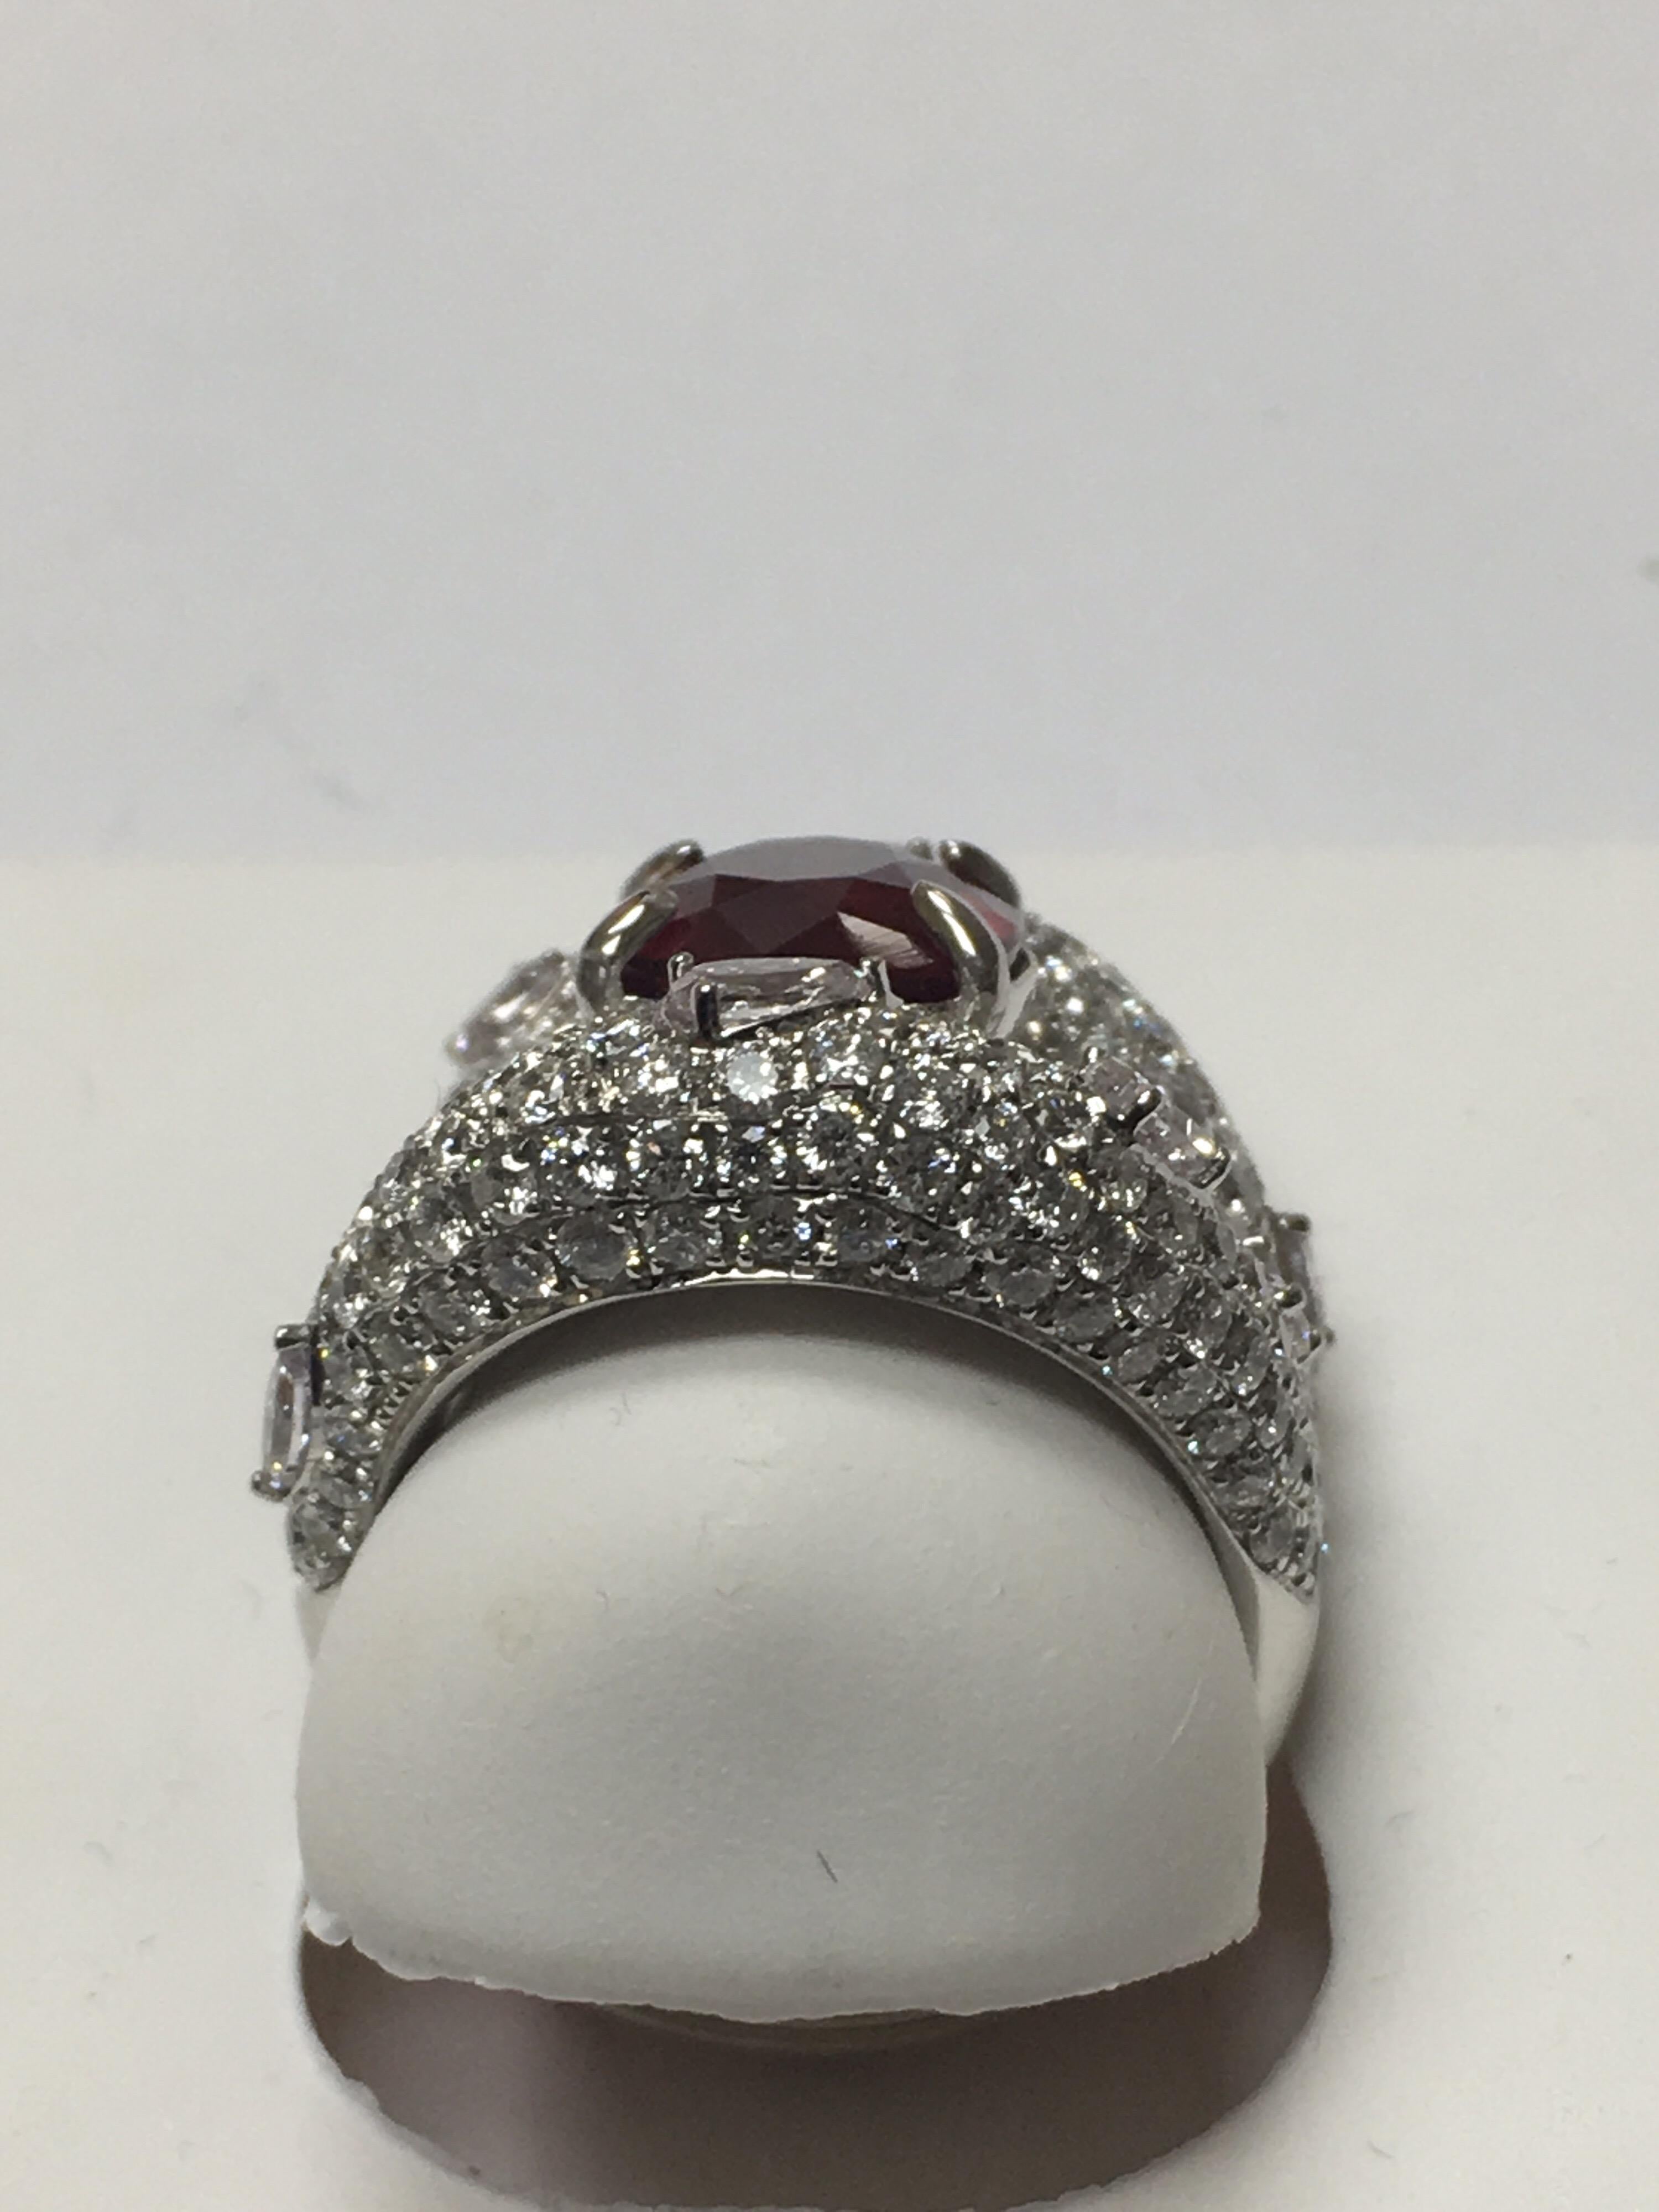 Oval Cut GRS Certified 5.52 Carat Natural Ruby Diamond Ring